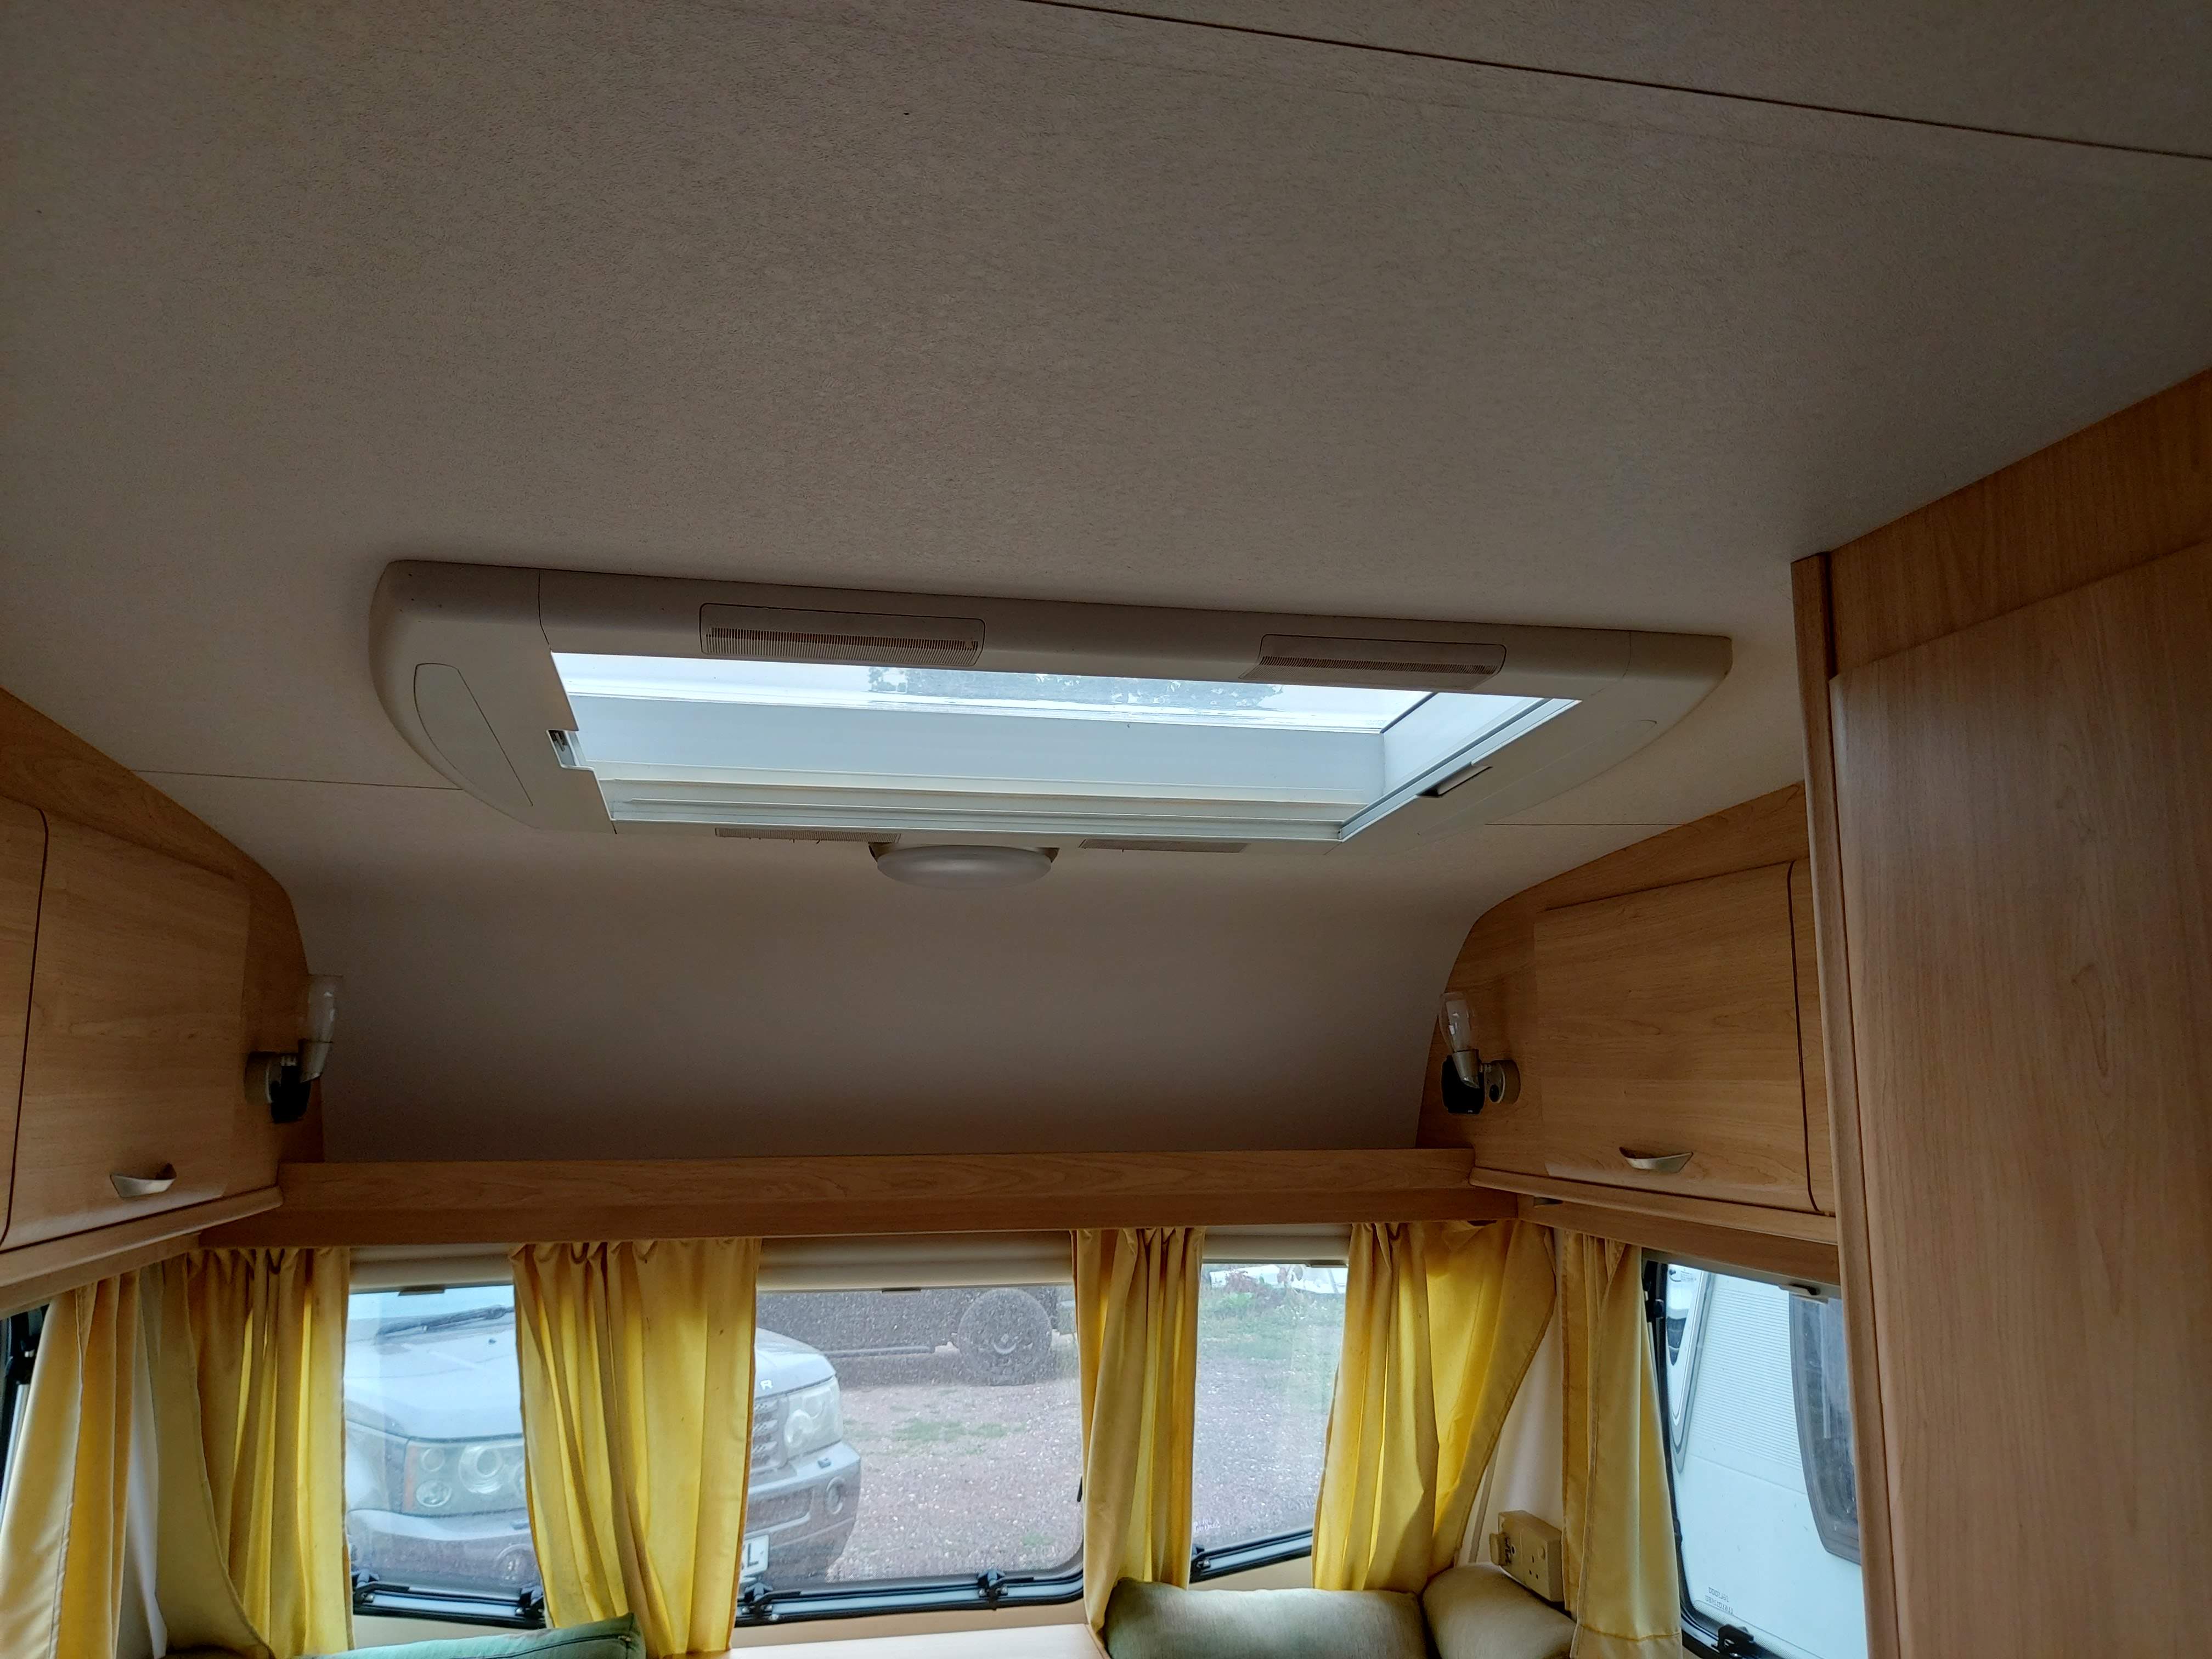 NOW SOLD 2006 Lunar Zenith 4, 4 Berth with rear bunks Caravan TRADE CLEARANCE SALE